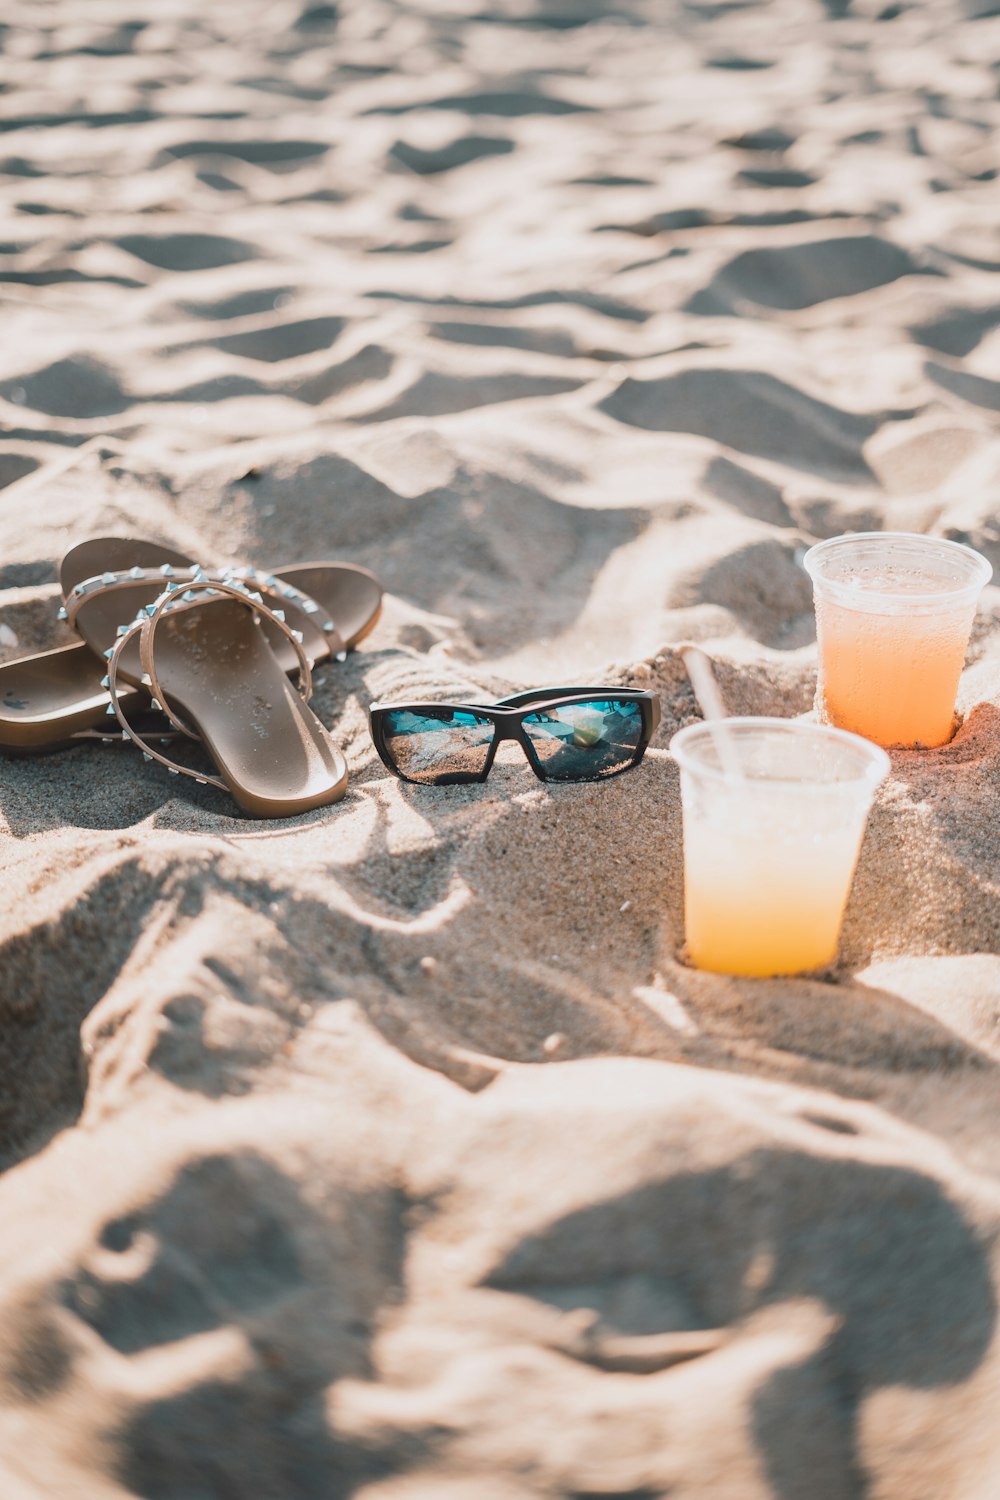 a pair of flip flops, sunglasses, and a drink on a sandy beach